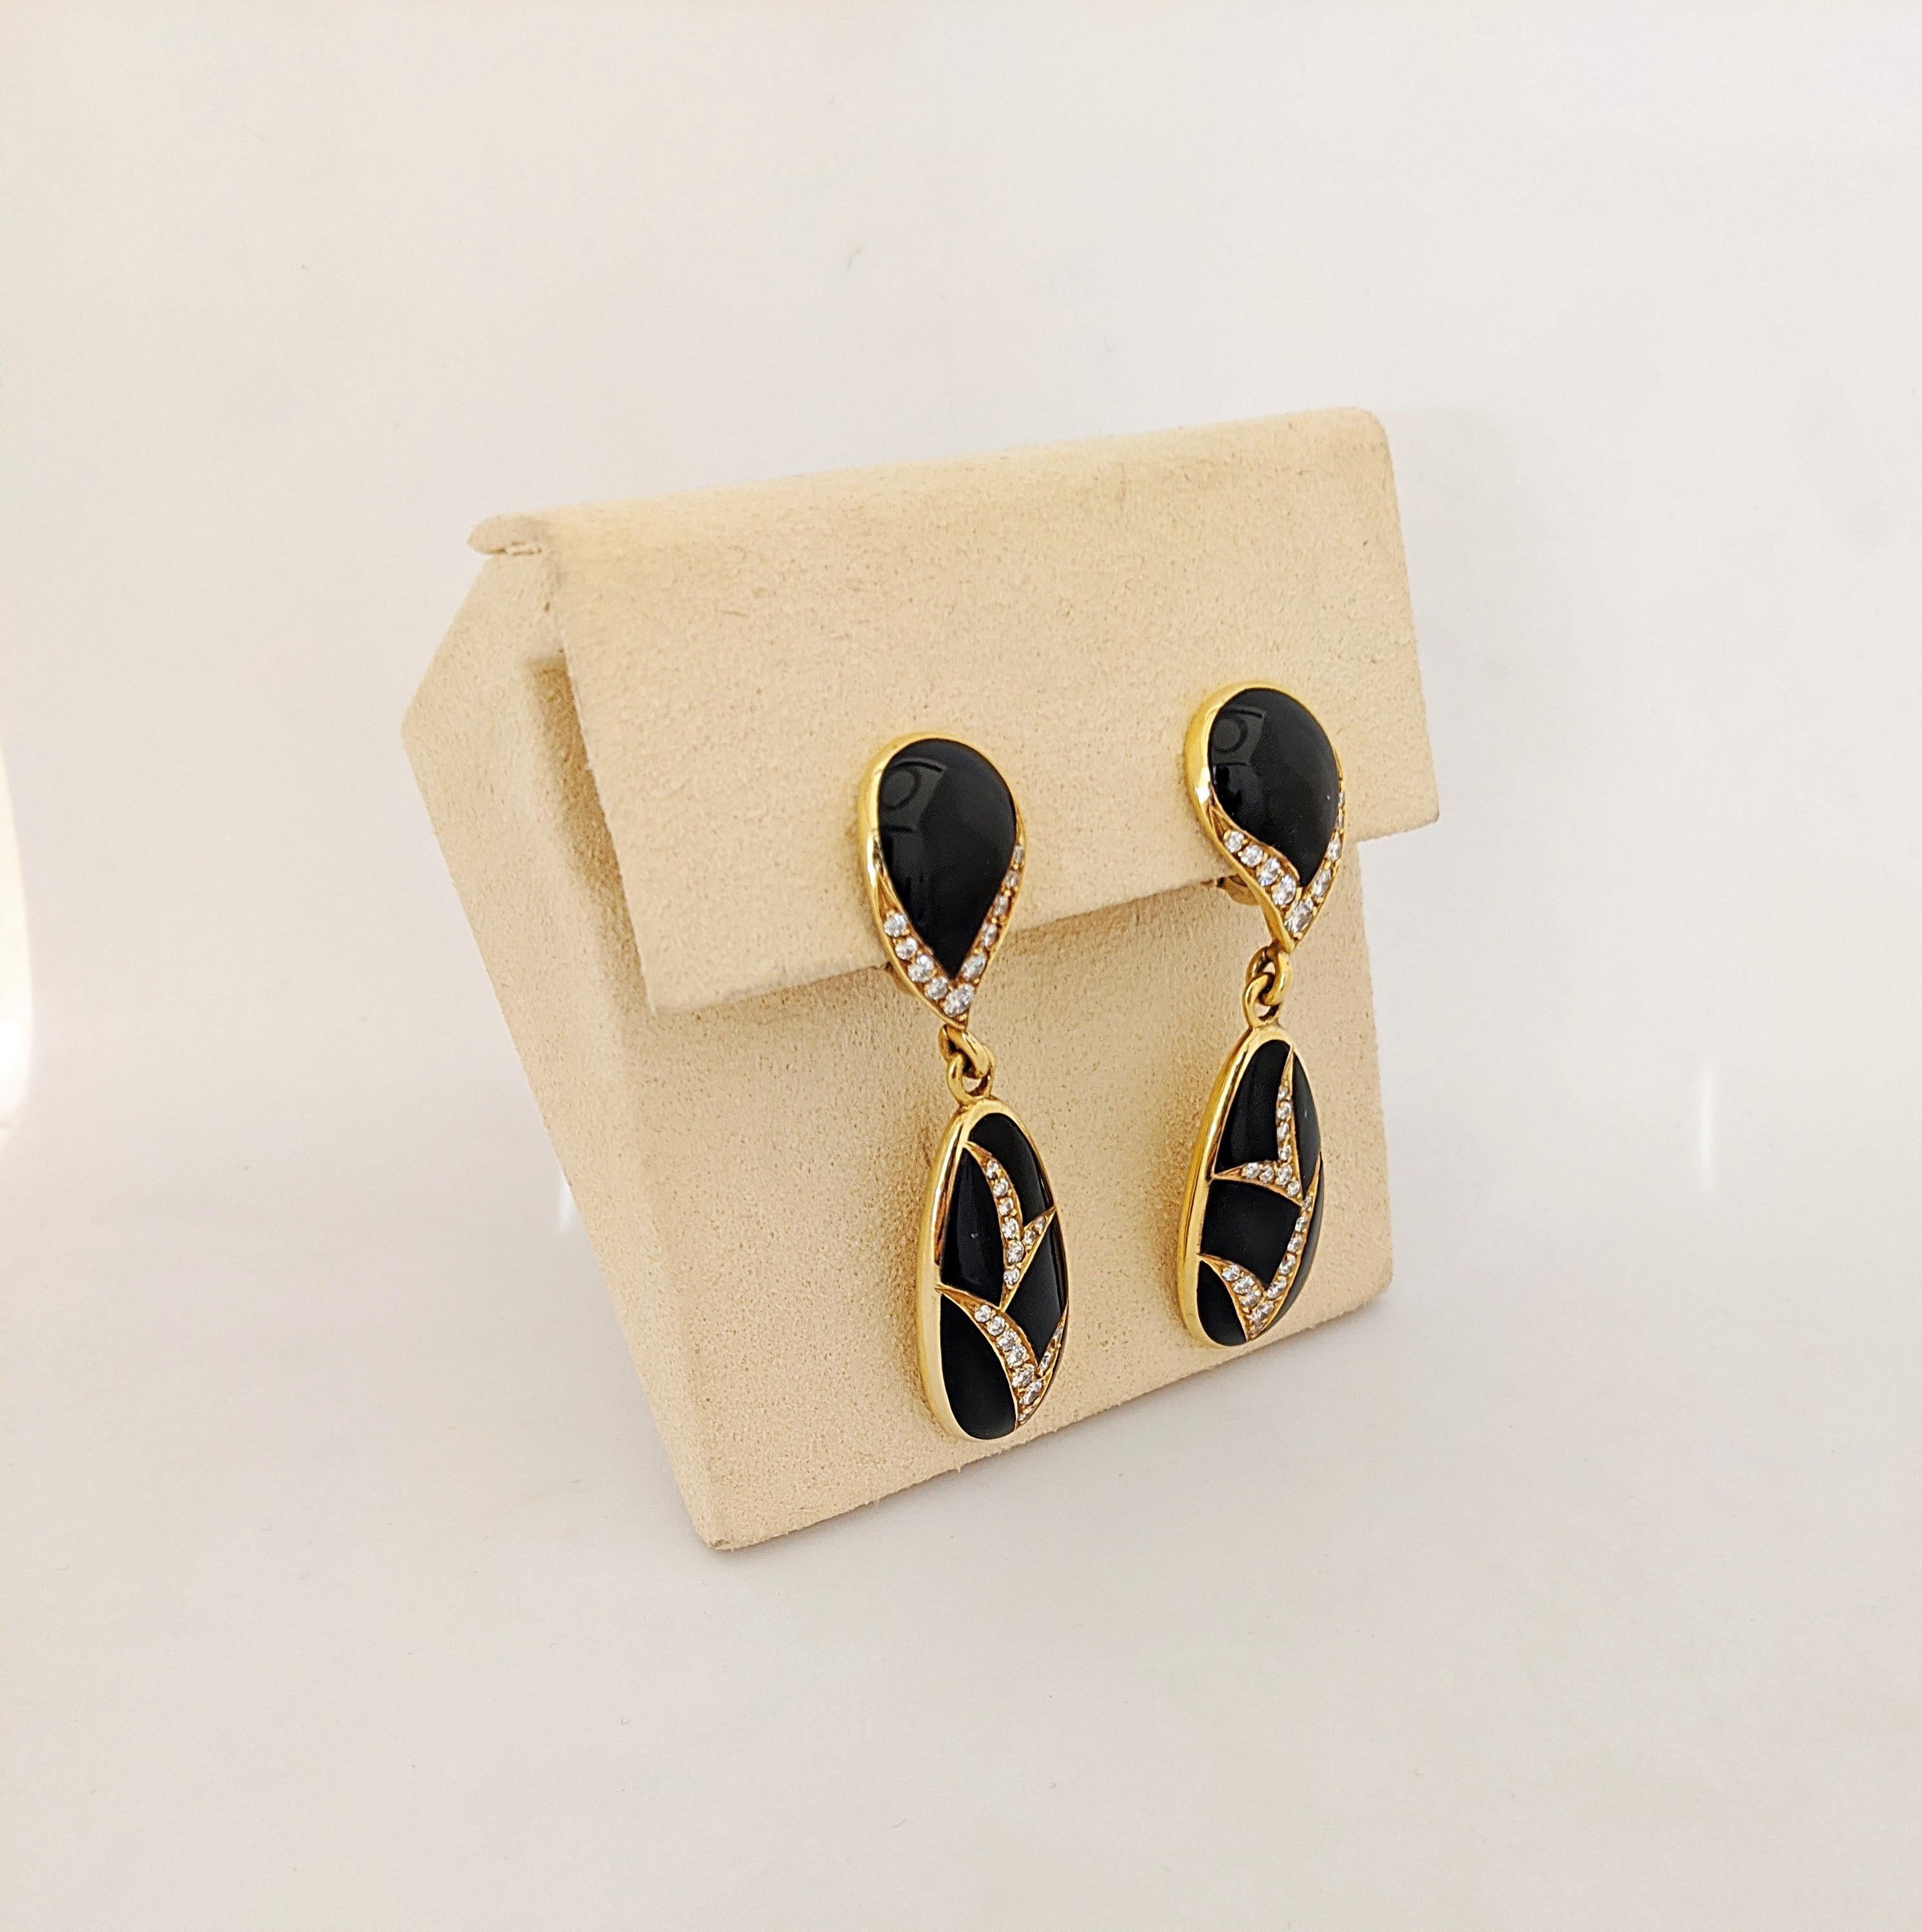 A very classic pair of 18 Karat Yellow Gold hanging drop earrings with Diamonds and Black Onyx. The earrings are designed with 2 sections . The top section features Black Onyx in a pear shape outlined with round Brilliant Cut diamonds. The bottom